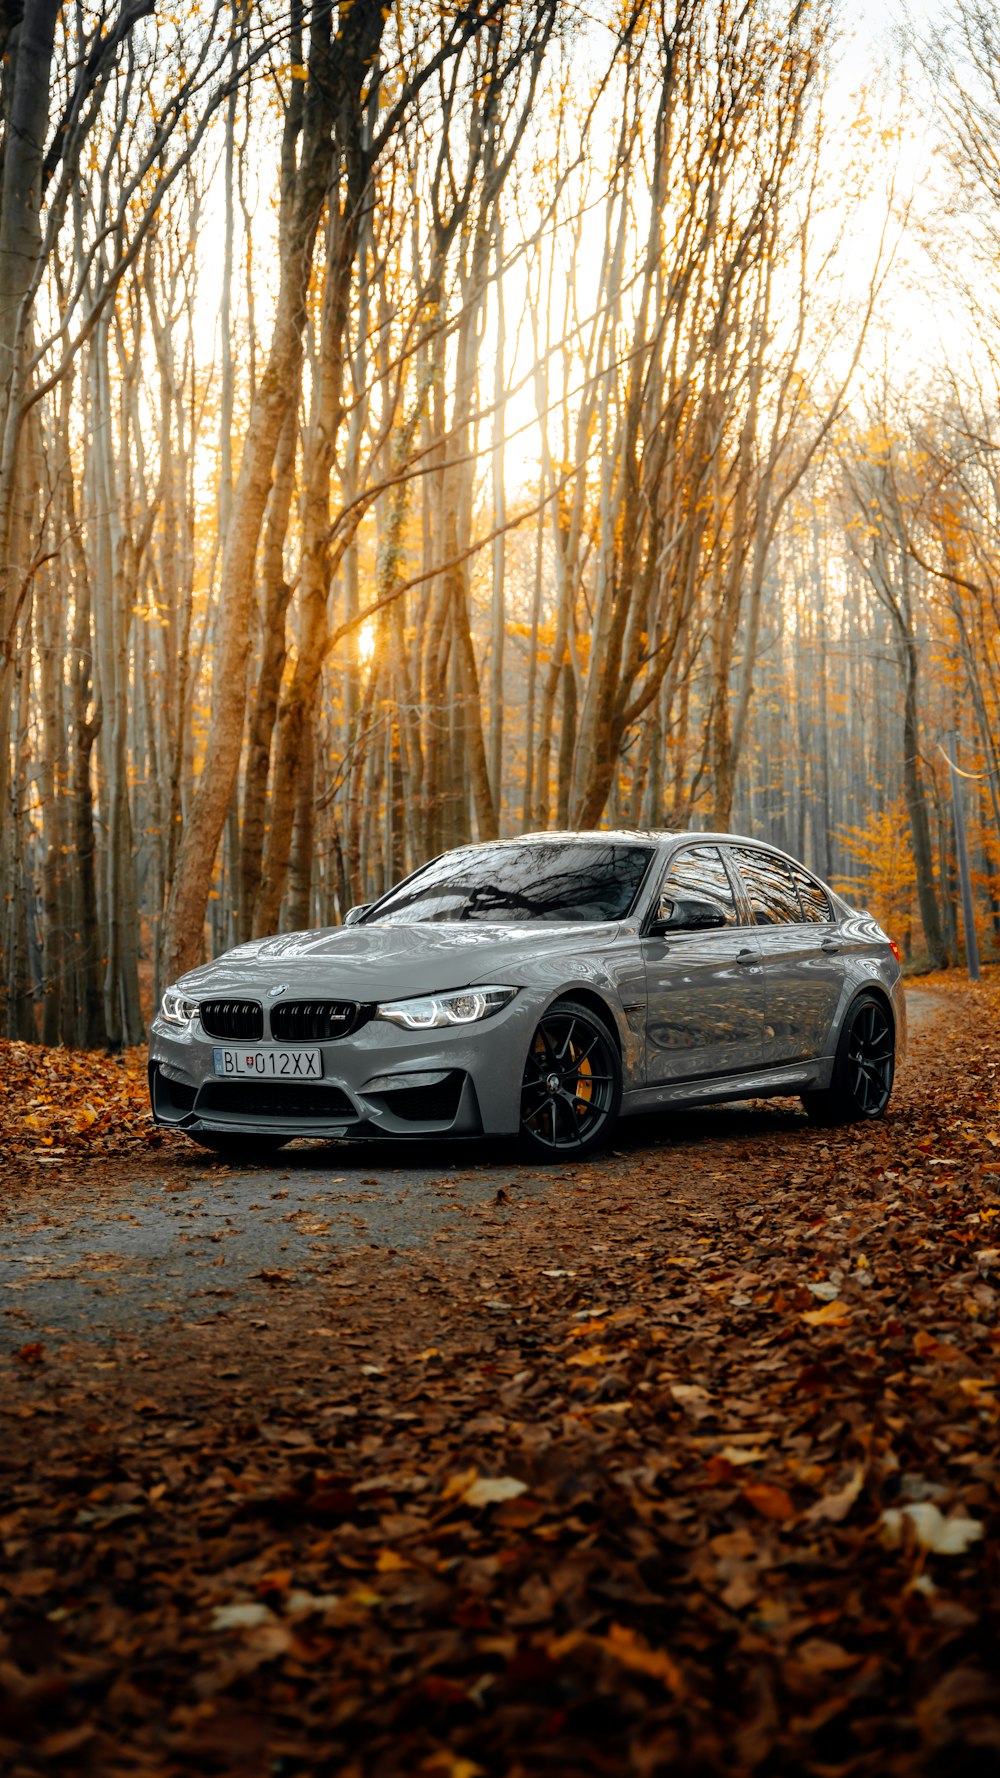 750+ Bmw Pictures [HD]  Download Free Images on Unsplash